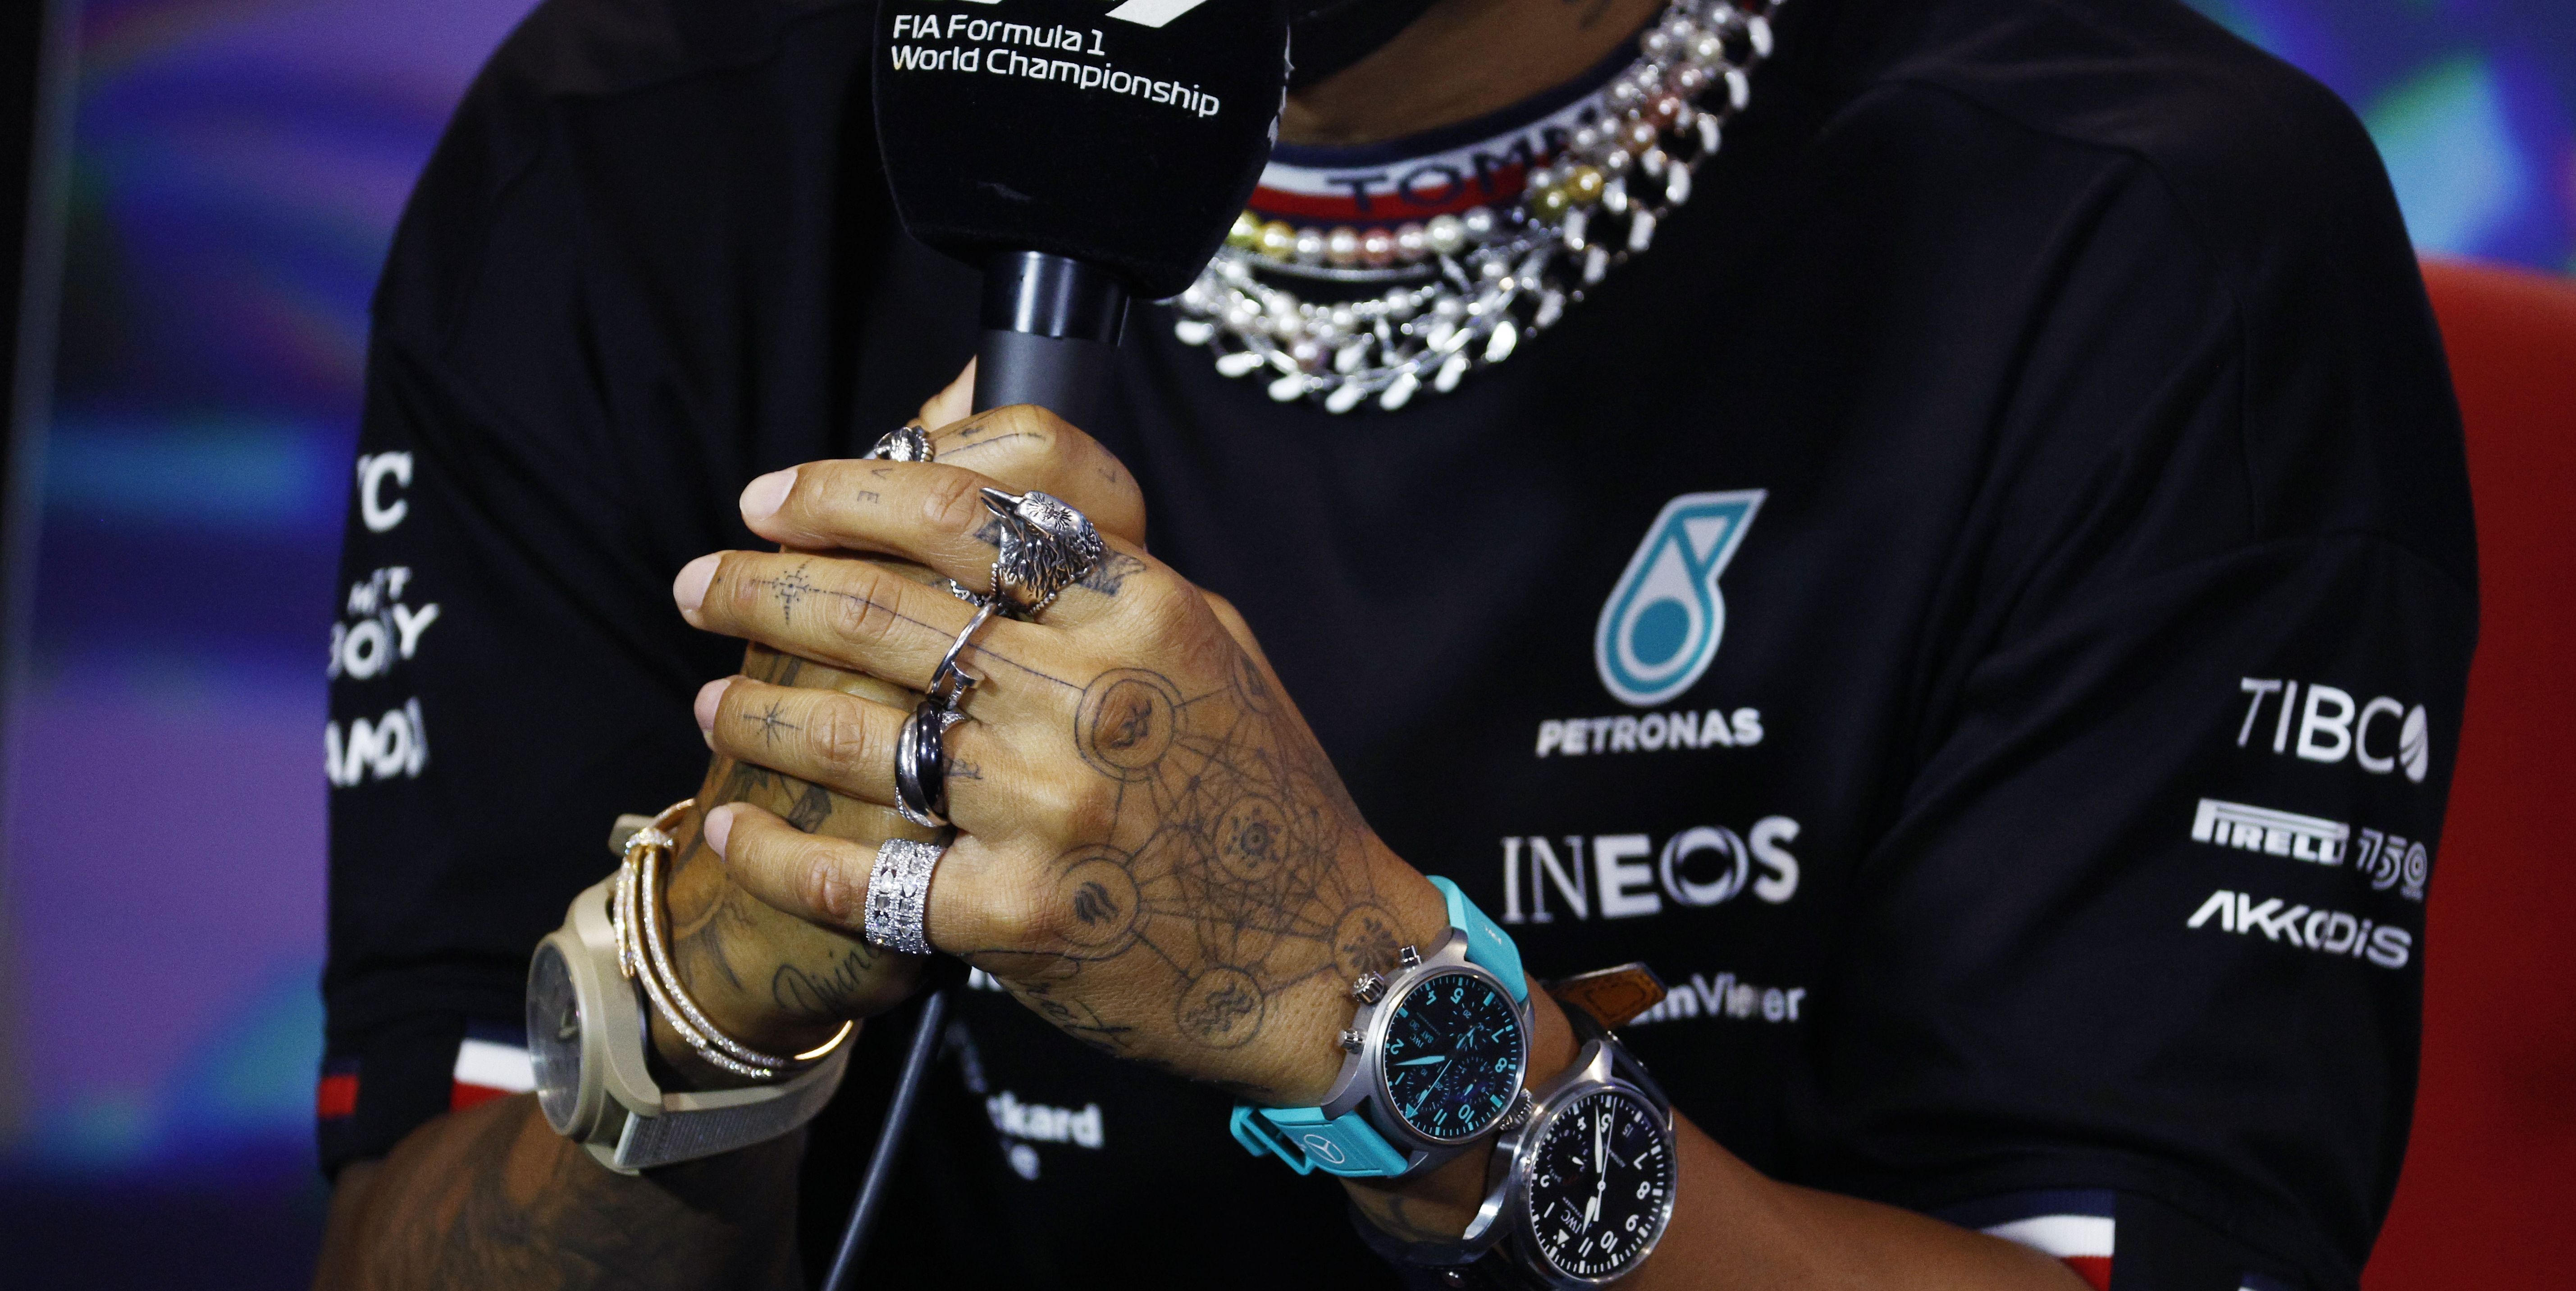 Lewis Hamilton Wears 3 Watches and 8 Rings in Response to FIA Jewelry Ban